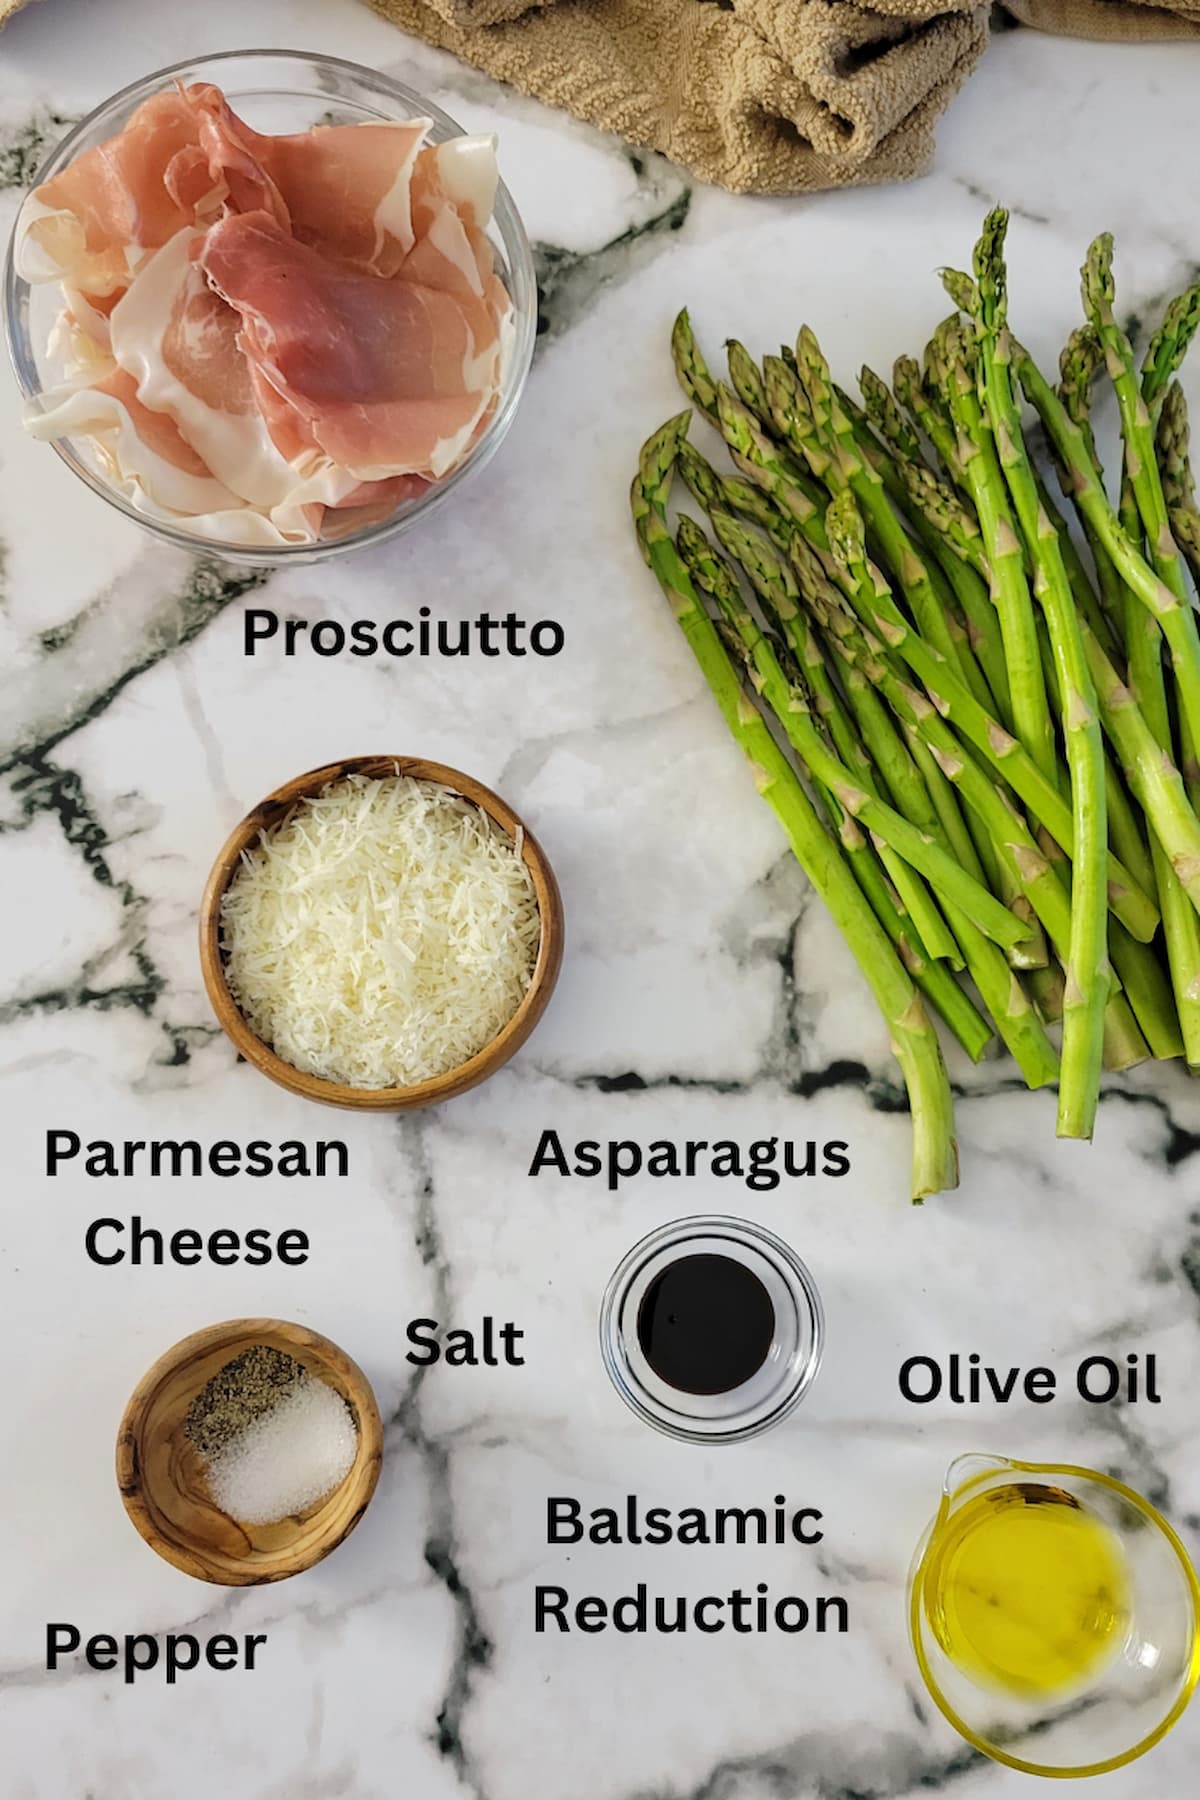 ingredients for asparagus prosciutto wrapped - prosciutto, asparagus, olive oil, parmesan cheese, balsamic reduction, salt, pepper